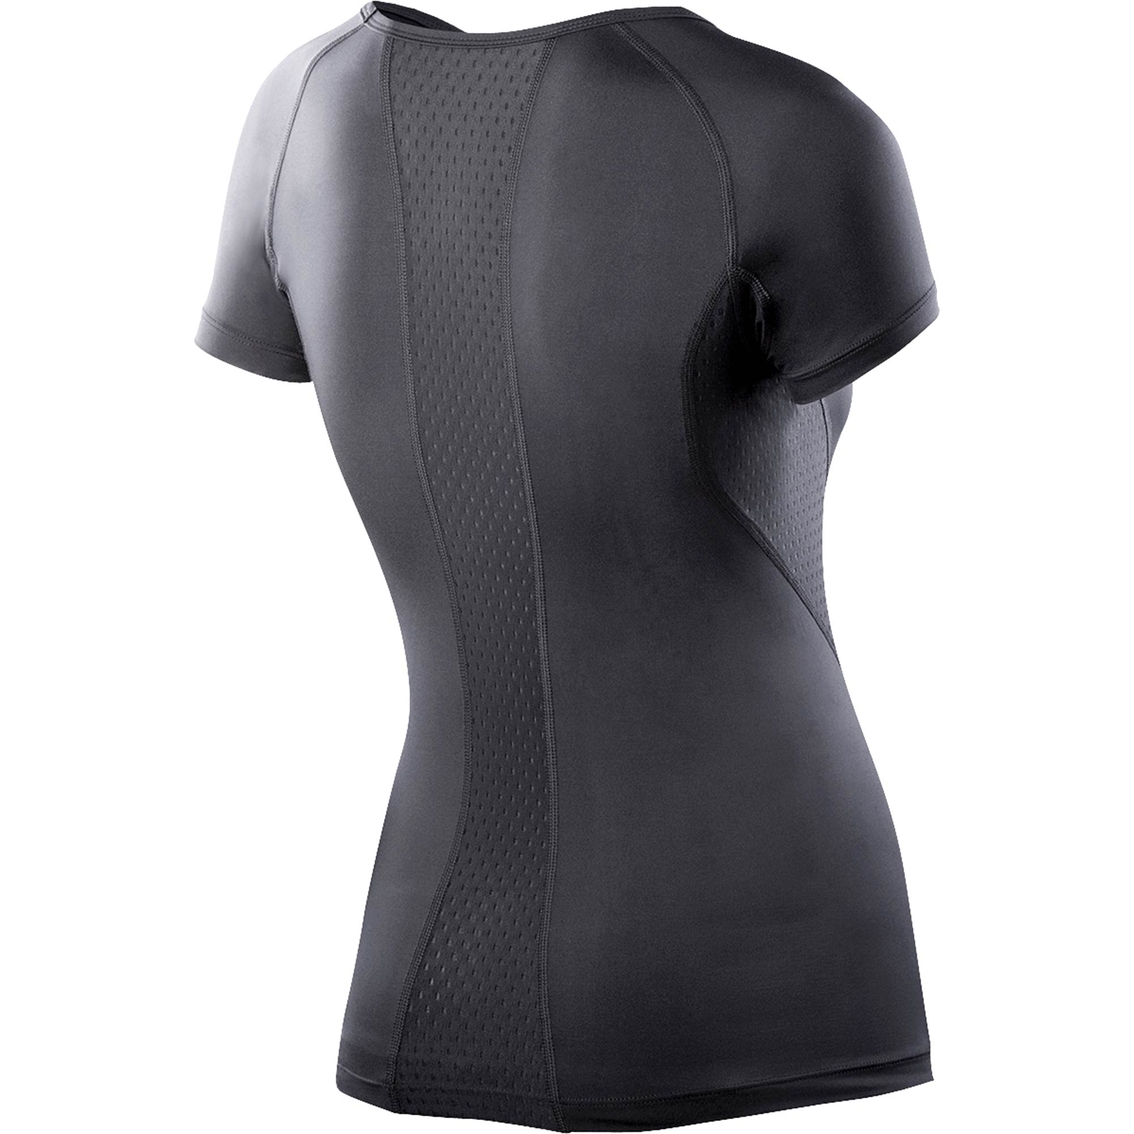 2XU Base Compression Top - Image 2 of 2